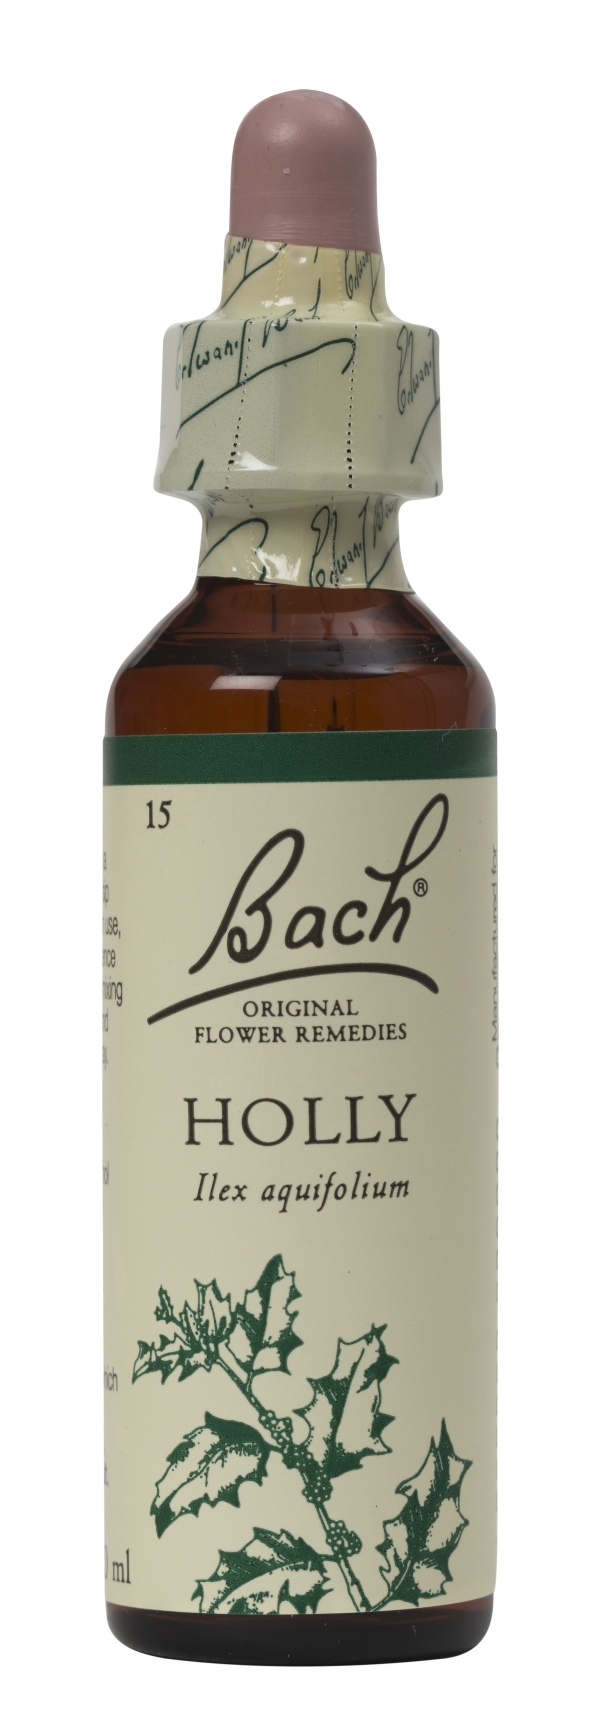 Nelson Bach Flower Remedies: Bach Holly Flower Remedy (20ml) available online here